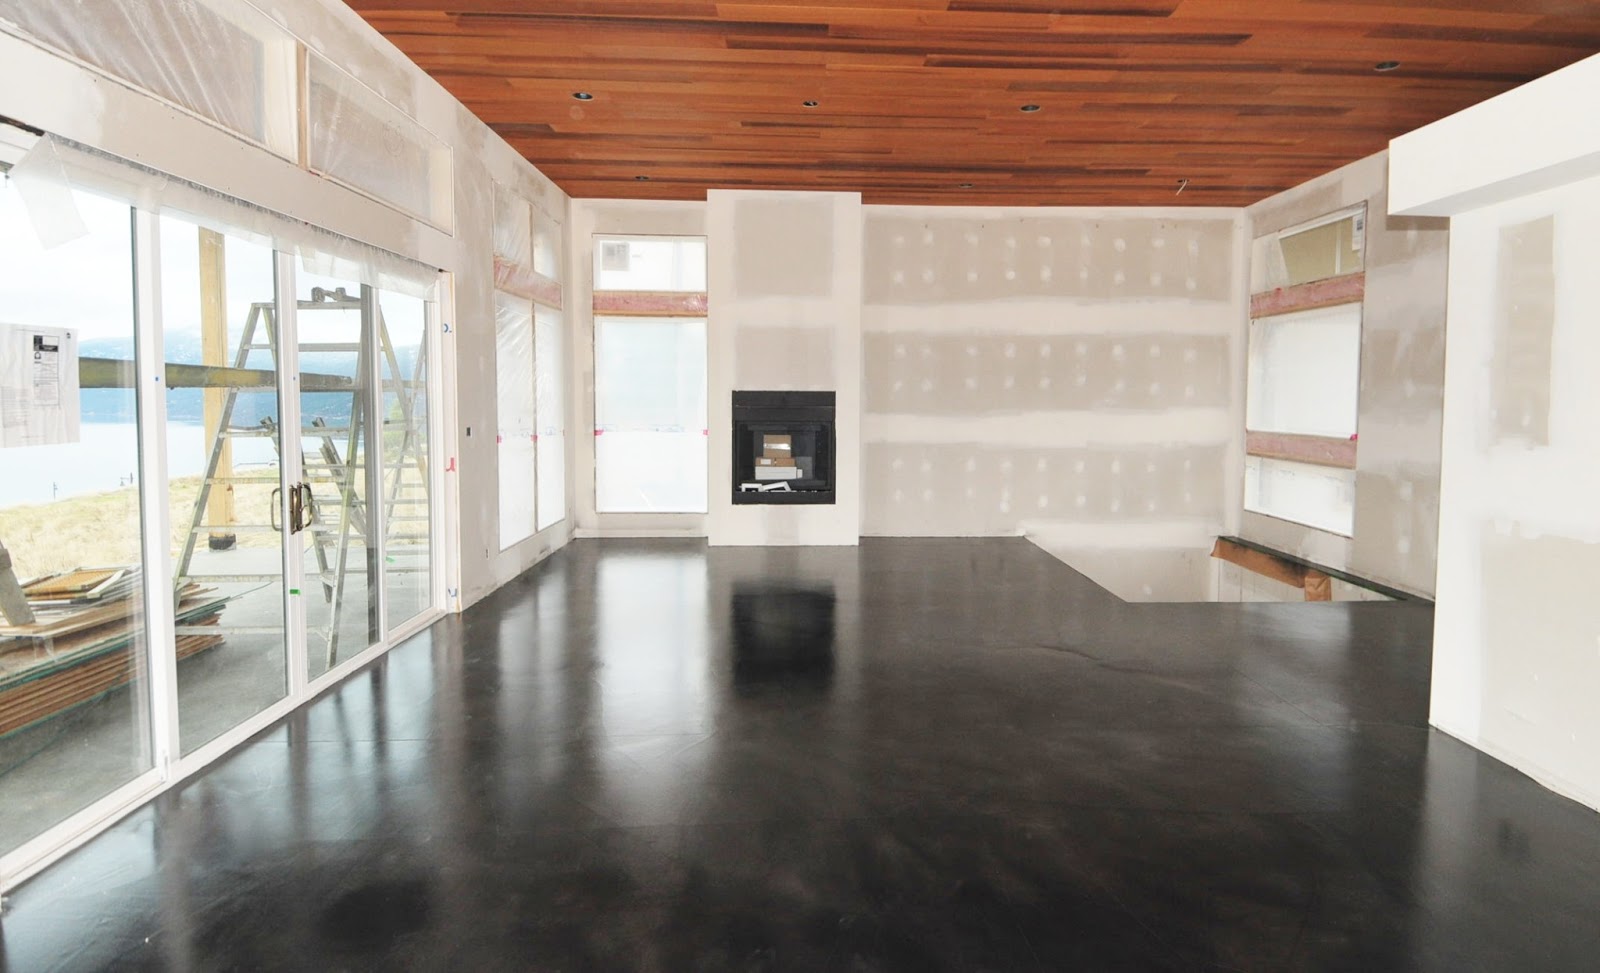 MODE CONCRETE: Black Acid Stained Modern Concrete Floor - created in